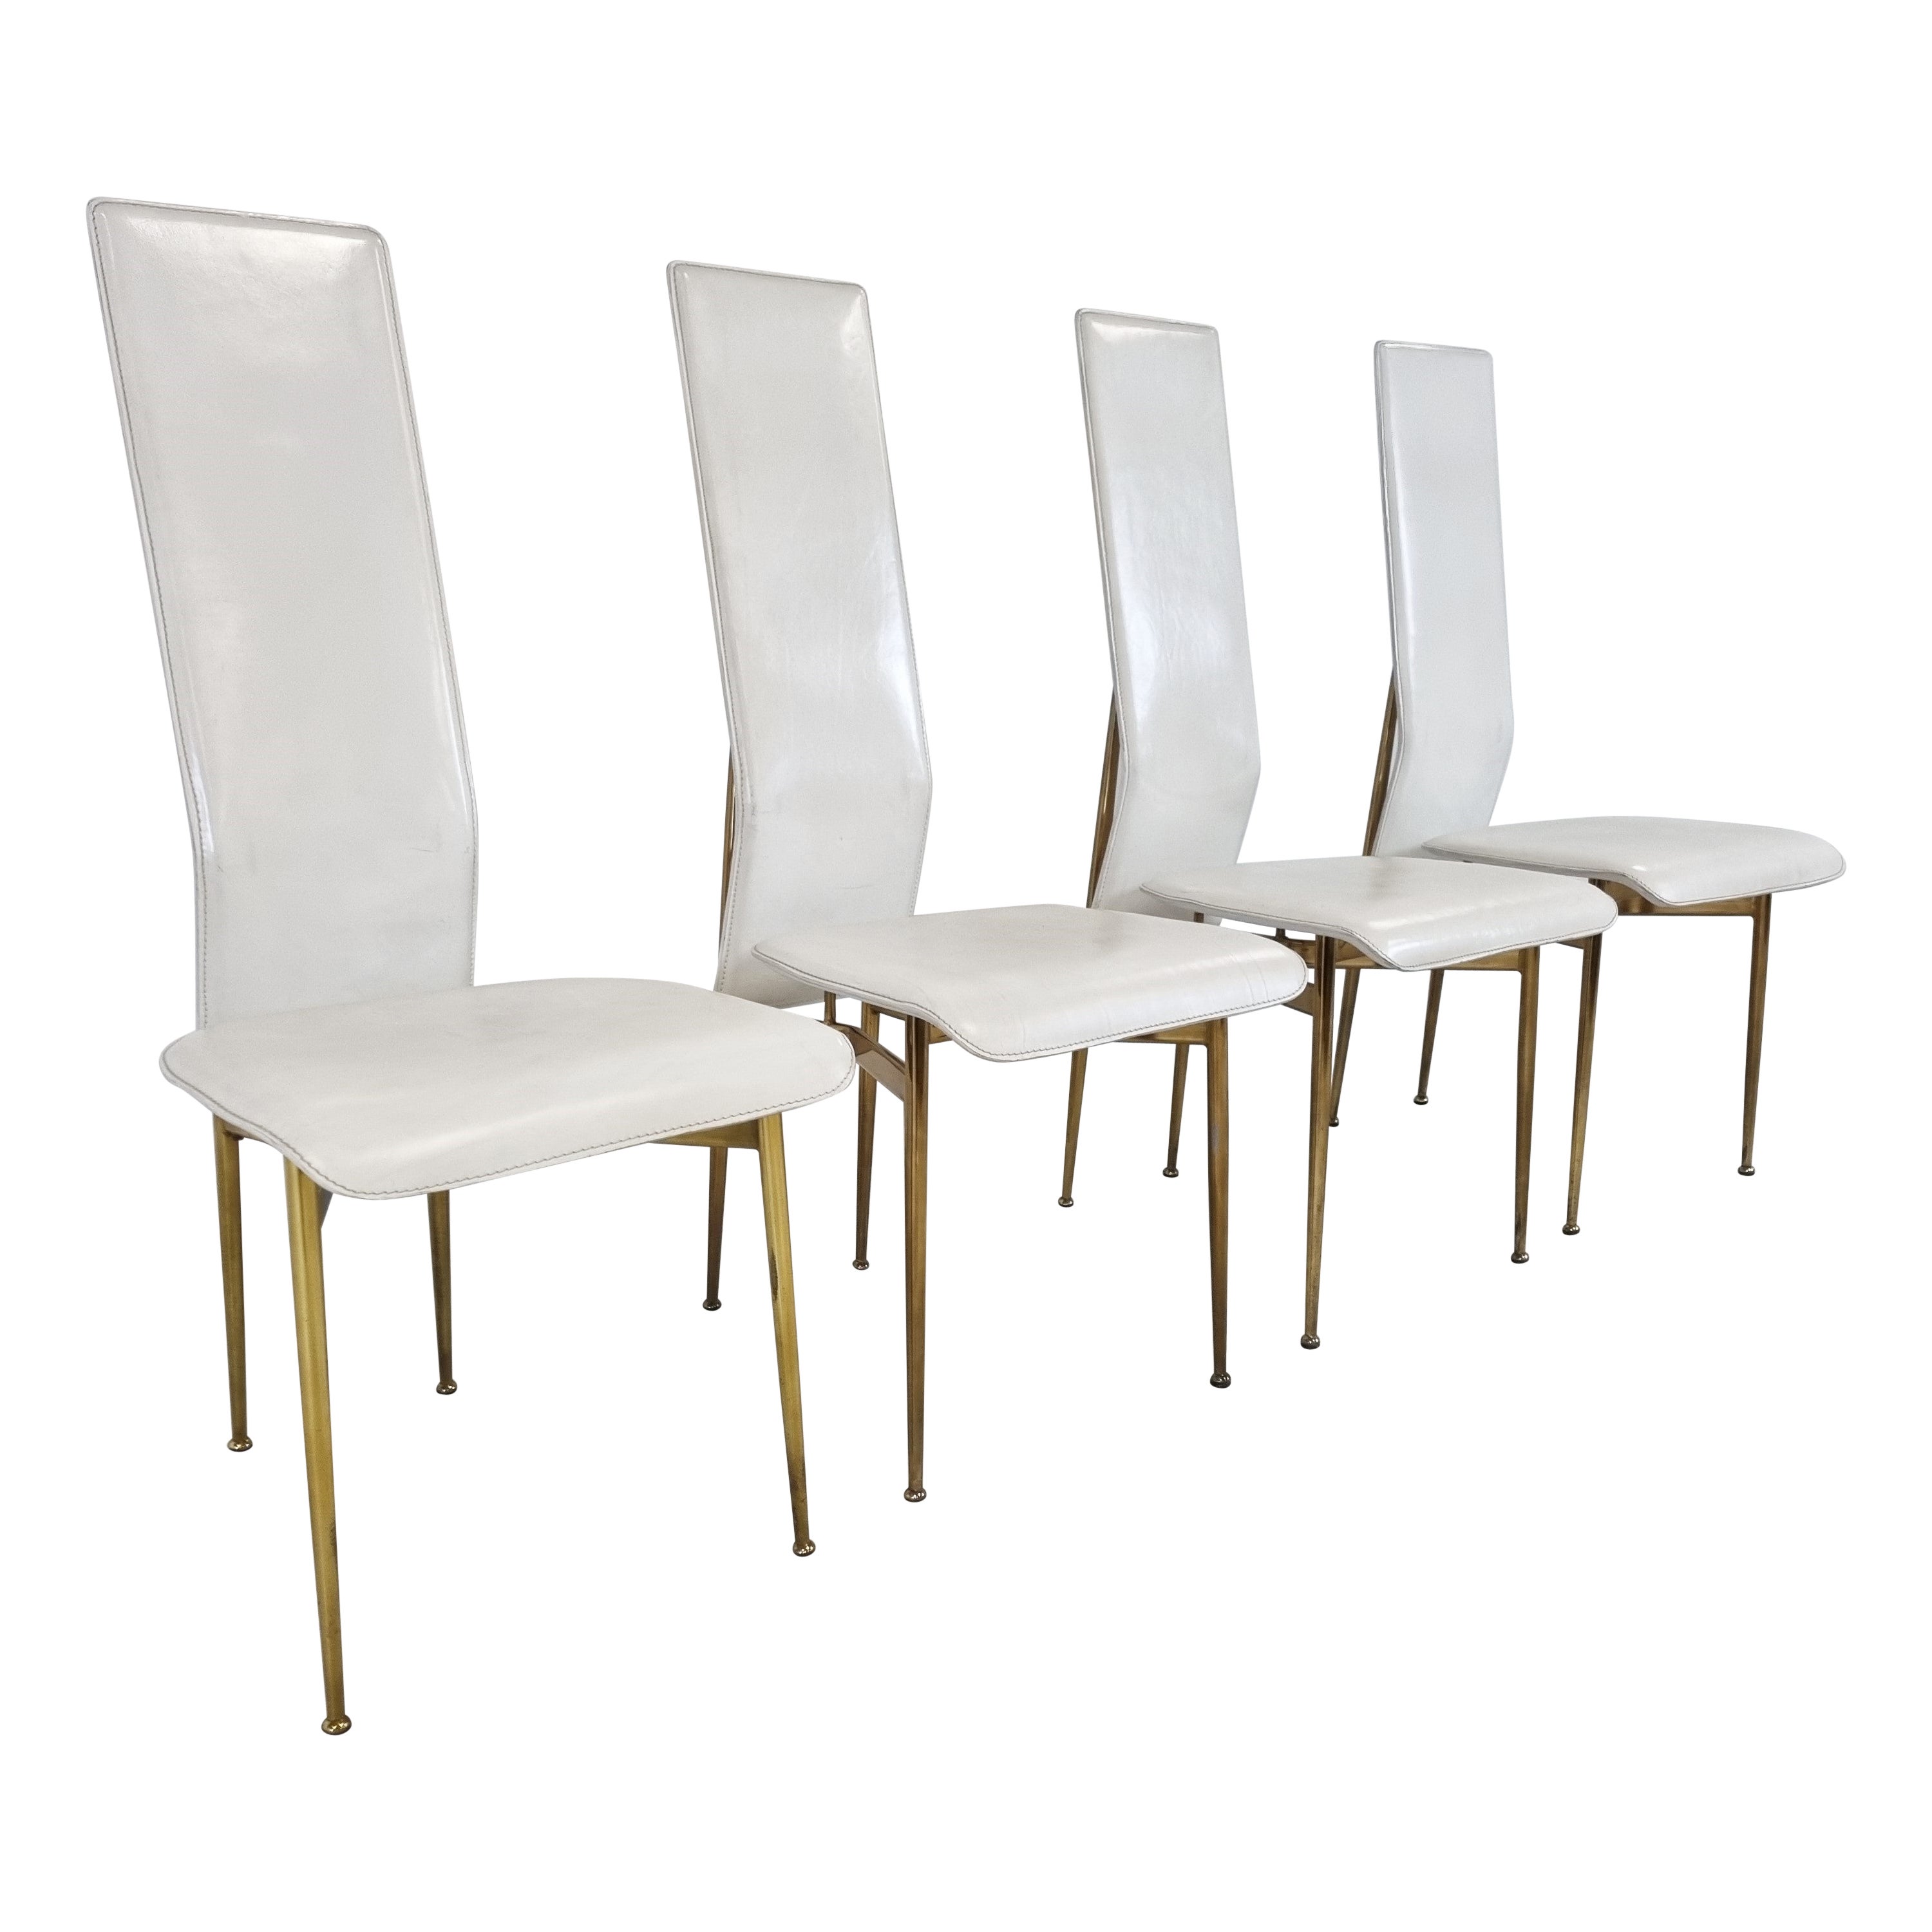 Vintage S44 Dining Chairs by Giancarlo Vegni for Fasem, Set of 4, 1980s